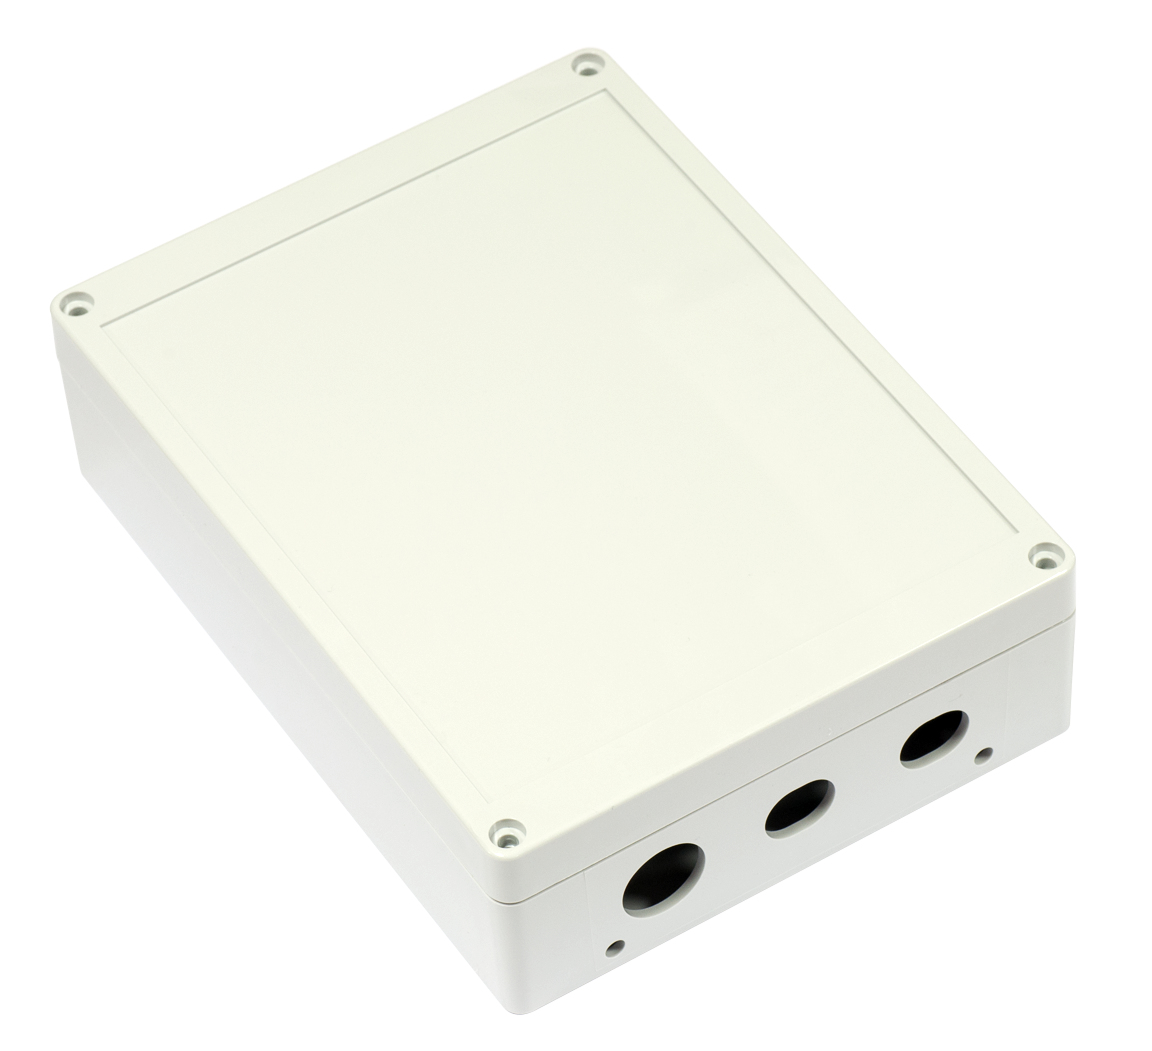 CAOTS MIKROTIK RouterBoard Small Outdoor Case - CAOTS